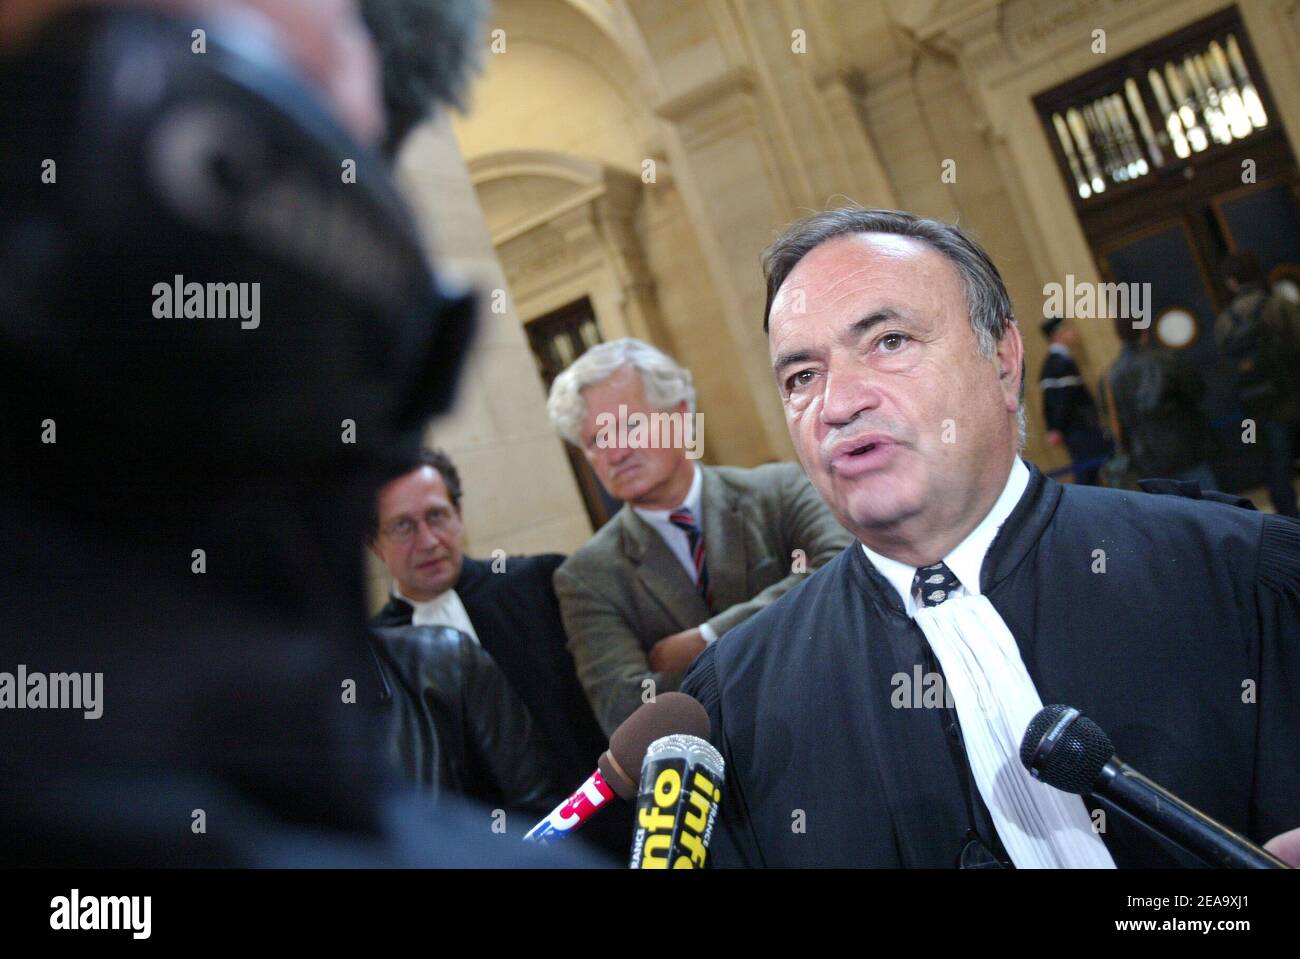 Jean-Charles Marchiani's lawyer, Maitre Jacques Tremolet de Villers, answers the press as he arrives to the magistrates' court in Paris, France, on October 3, 2005, for the opening of Marchiani's trial. Marchiani, 62, French prefect, former European Parlement member and former right-hand man of the French government for secret missions, appears for influence peddling in a 1.25 million euro contract signed in the 90's between the French weapon company Giat Industries and the German company Renk. He incurs a ten-year prison sentence and a 150,000 euro fine. Photo by Mehdi Taamallah/ABACAPRESS.CO Stock Photo